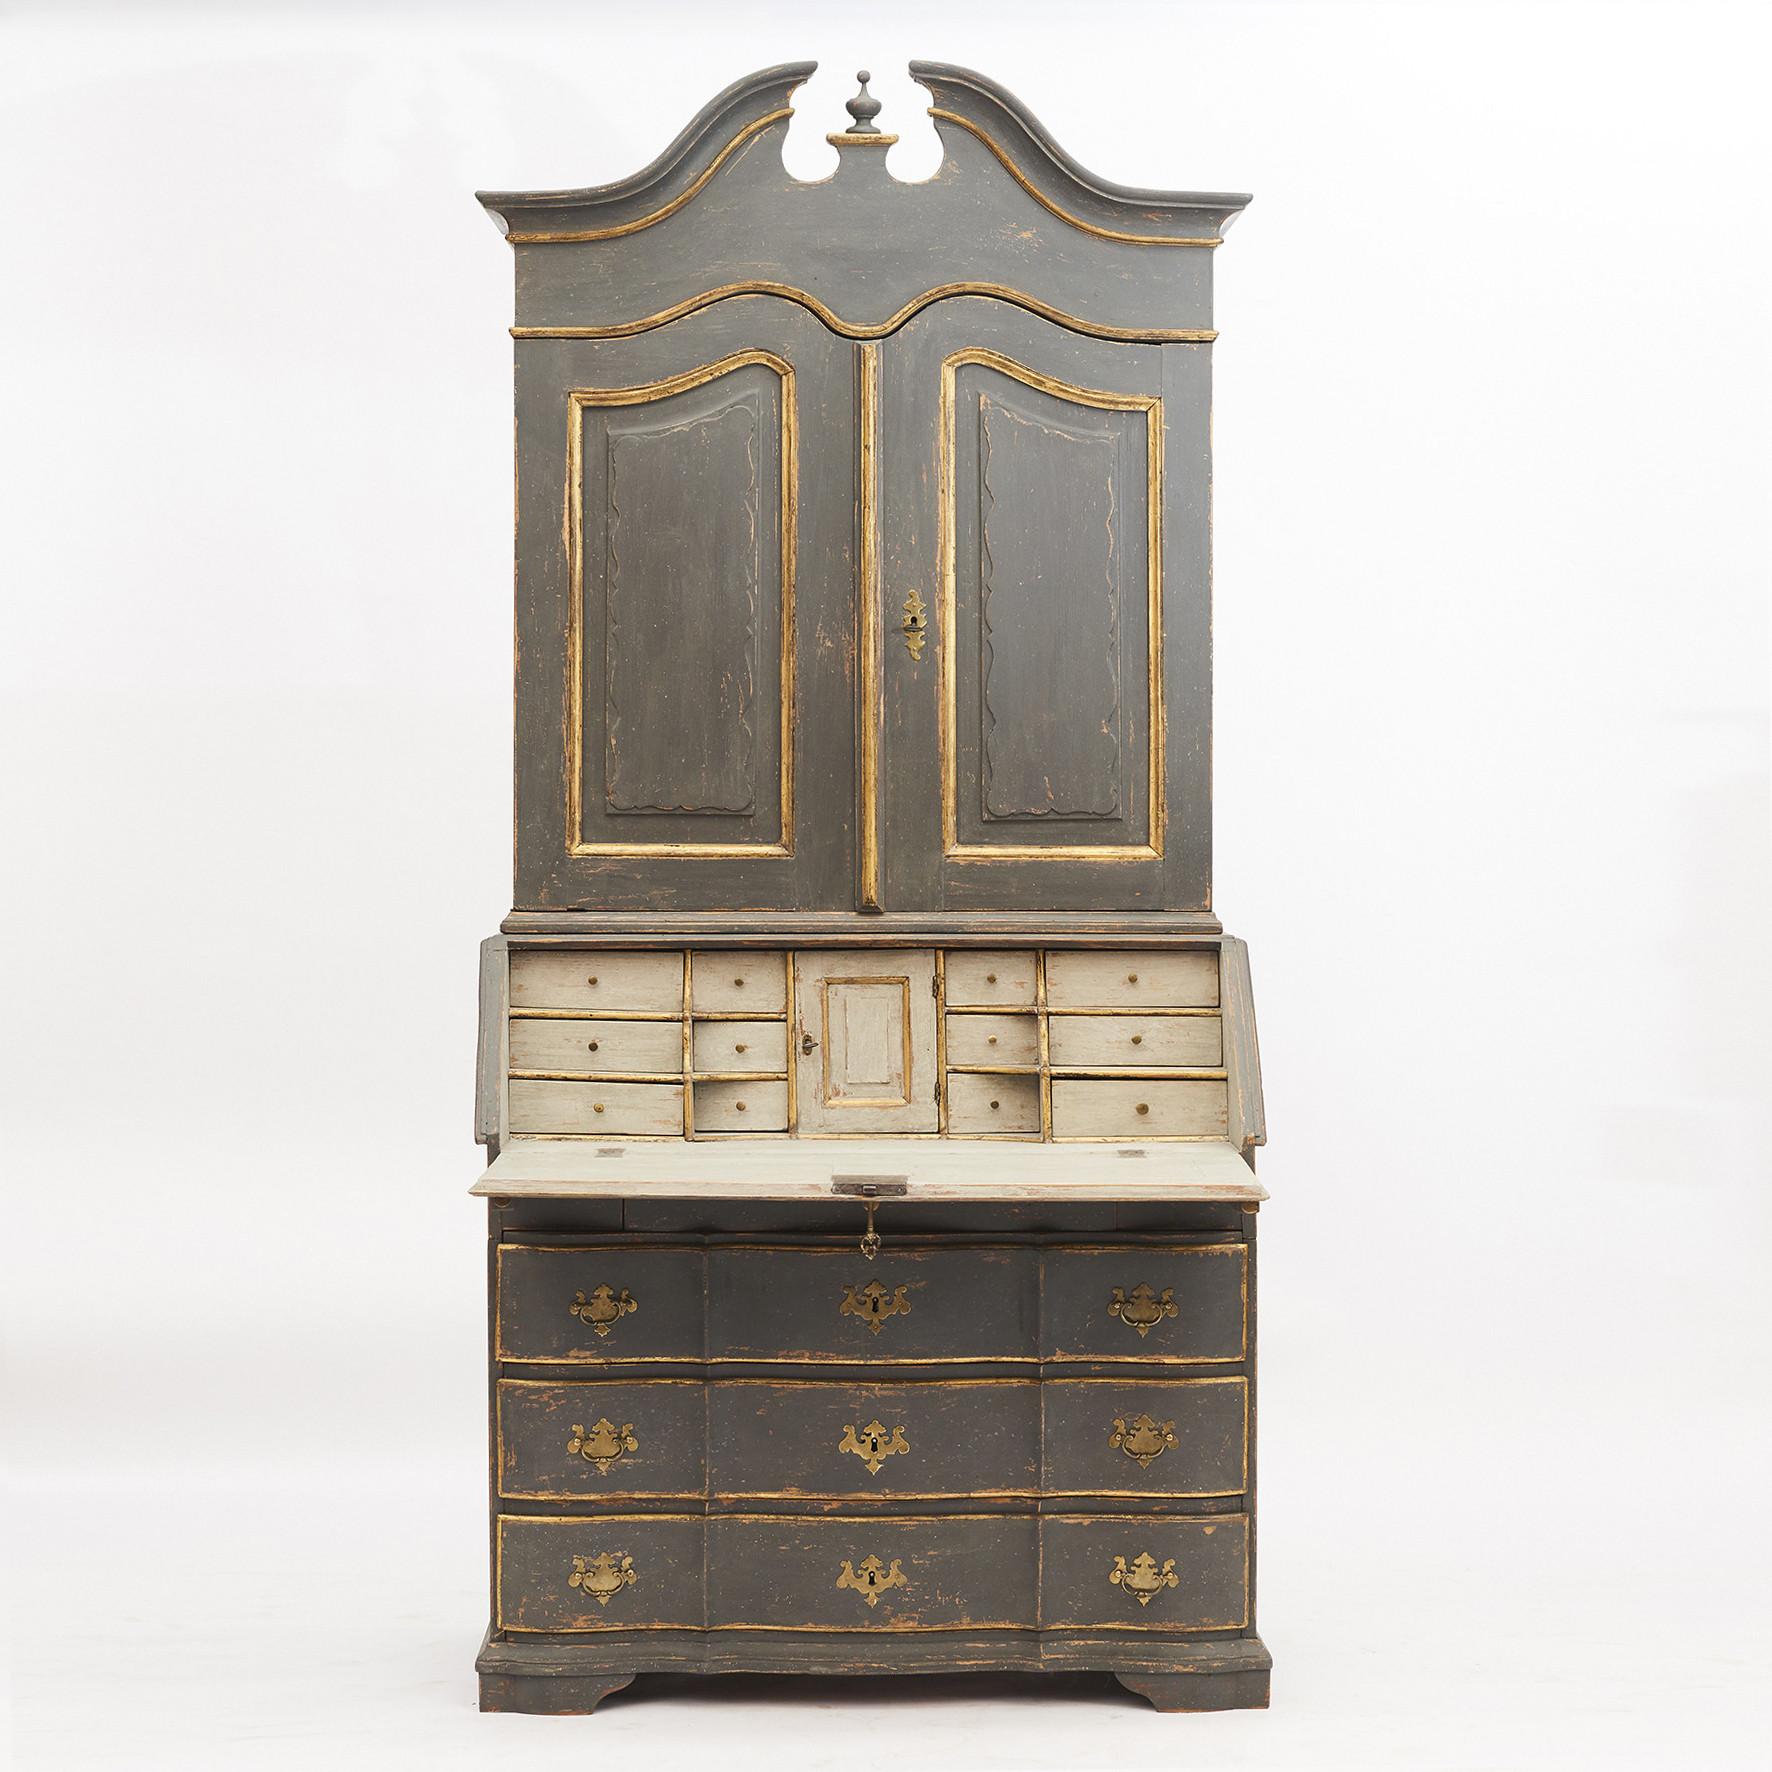 Danish Baroque bureau, 1750-1780.
Lower part with fluted front. Top part with a pair of curving doors and swan neck top.
Exterior granite gray color, list of subdued gold leaf. Behind flap numerous drawers in light gray color.
Denmark,